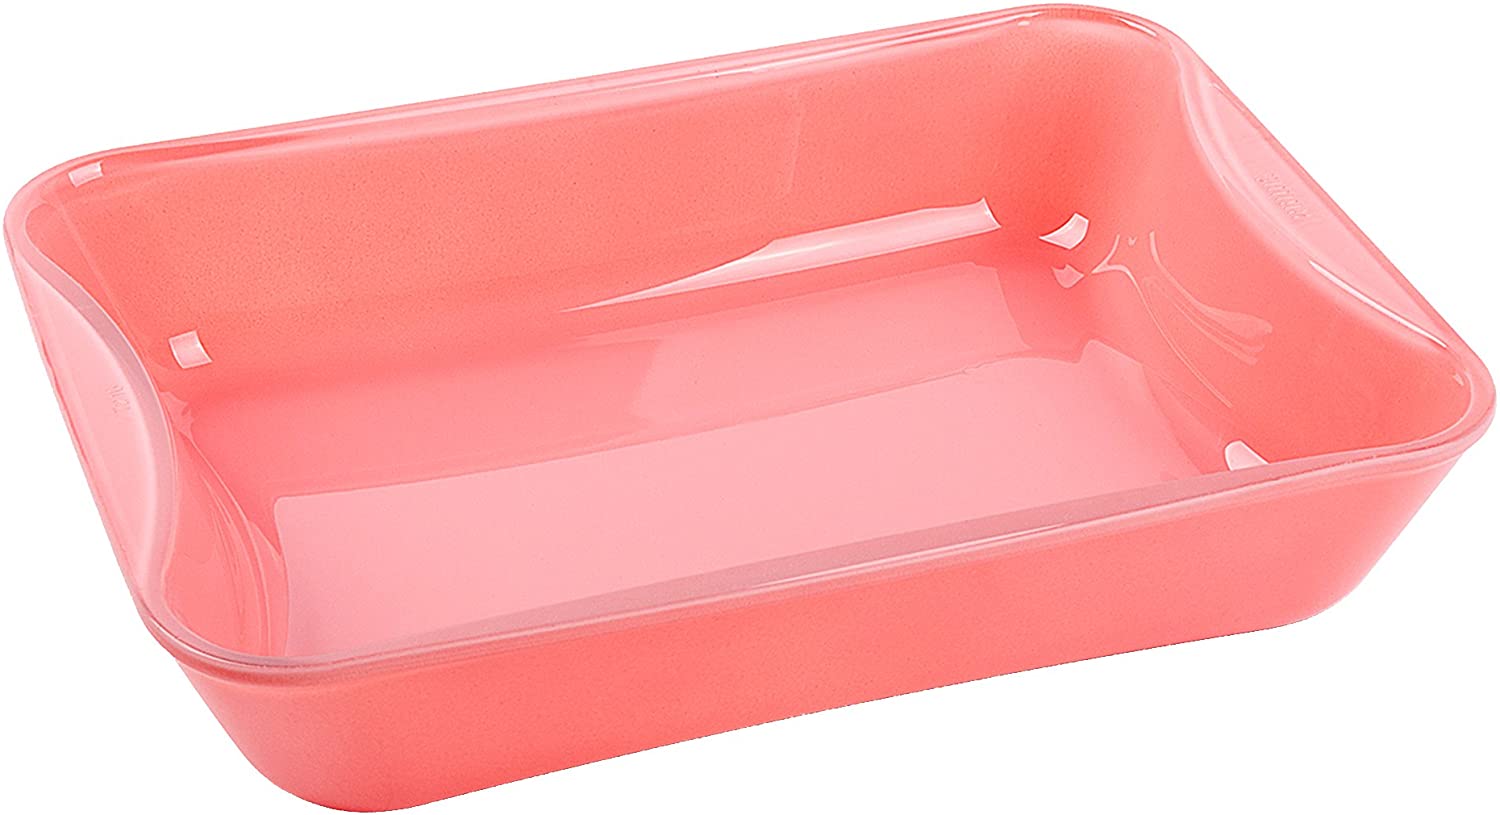 Bohemia Cristal 093 012 306 Play of colors Cooking Frying and Baking Dish Rectangular Approx. 2.5 Litre Glass Heat Resistant Borosilicate Glass Baking Dish 31 x 22.8 x 6.2 cm